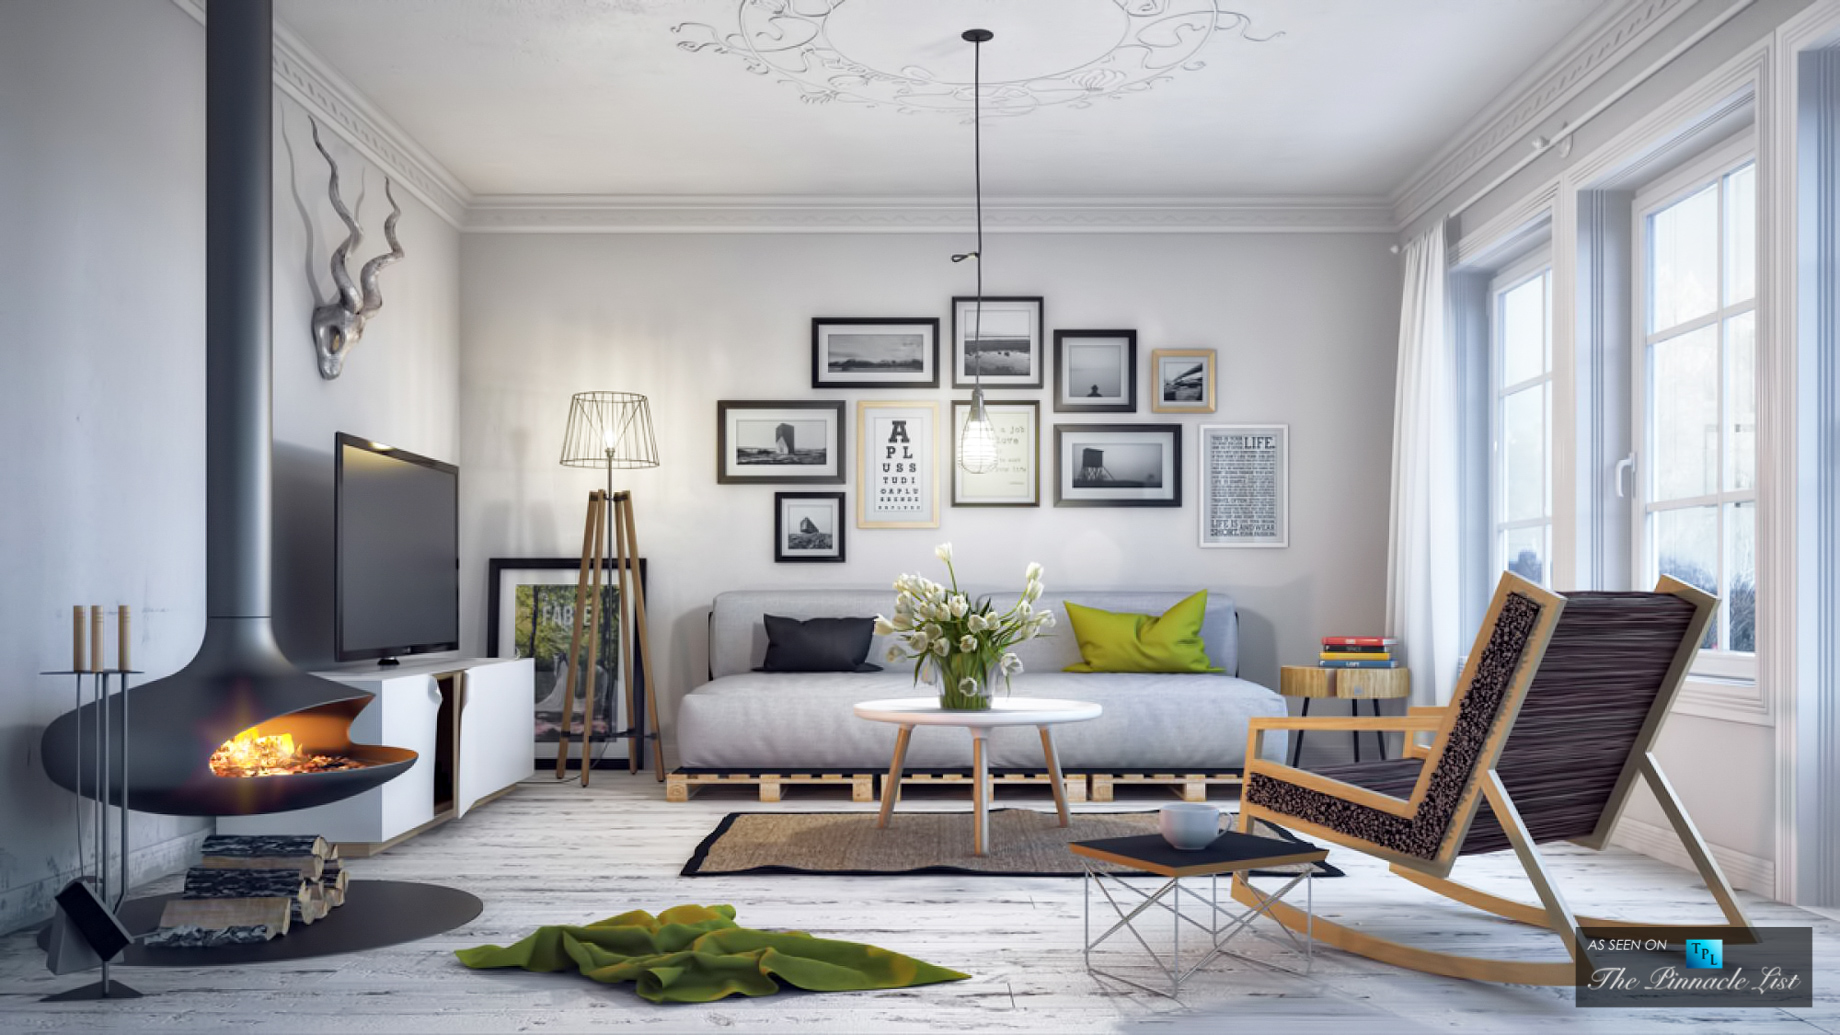 Cozying It Up Is Making It Easier - Top 6 Home Renovation Trends To Lookout For This Year